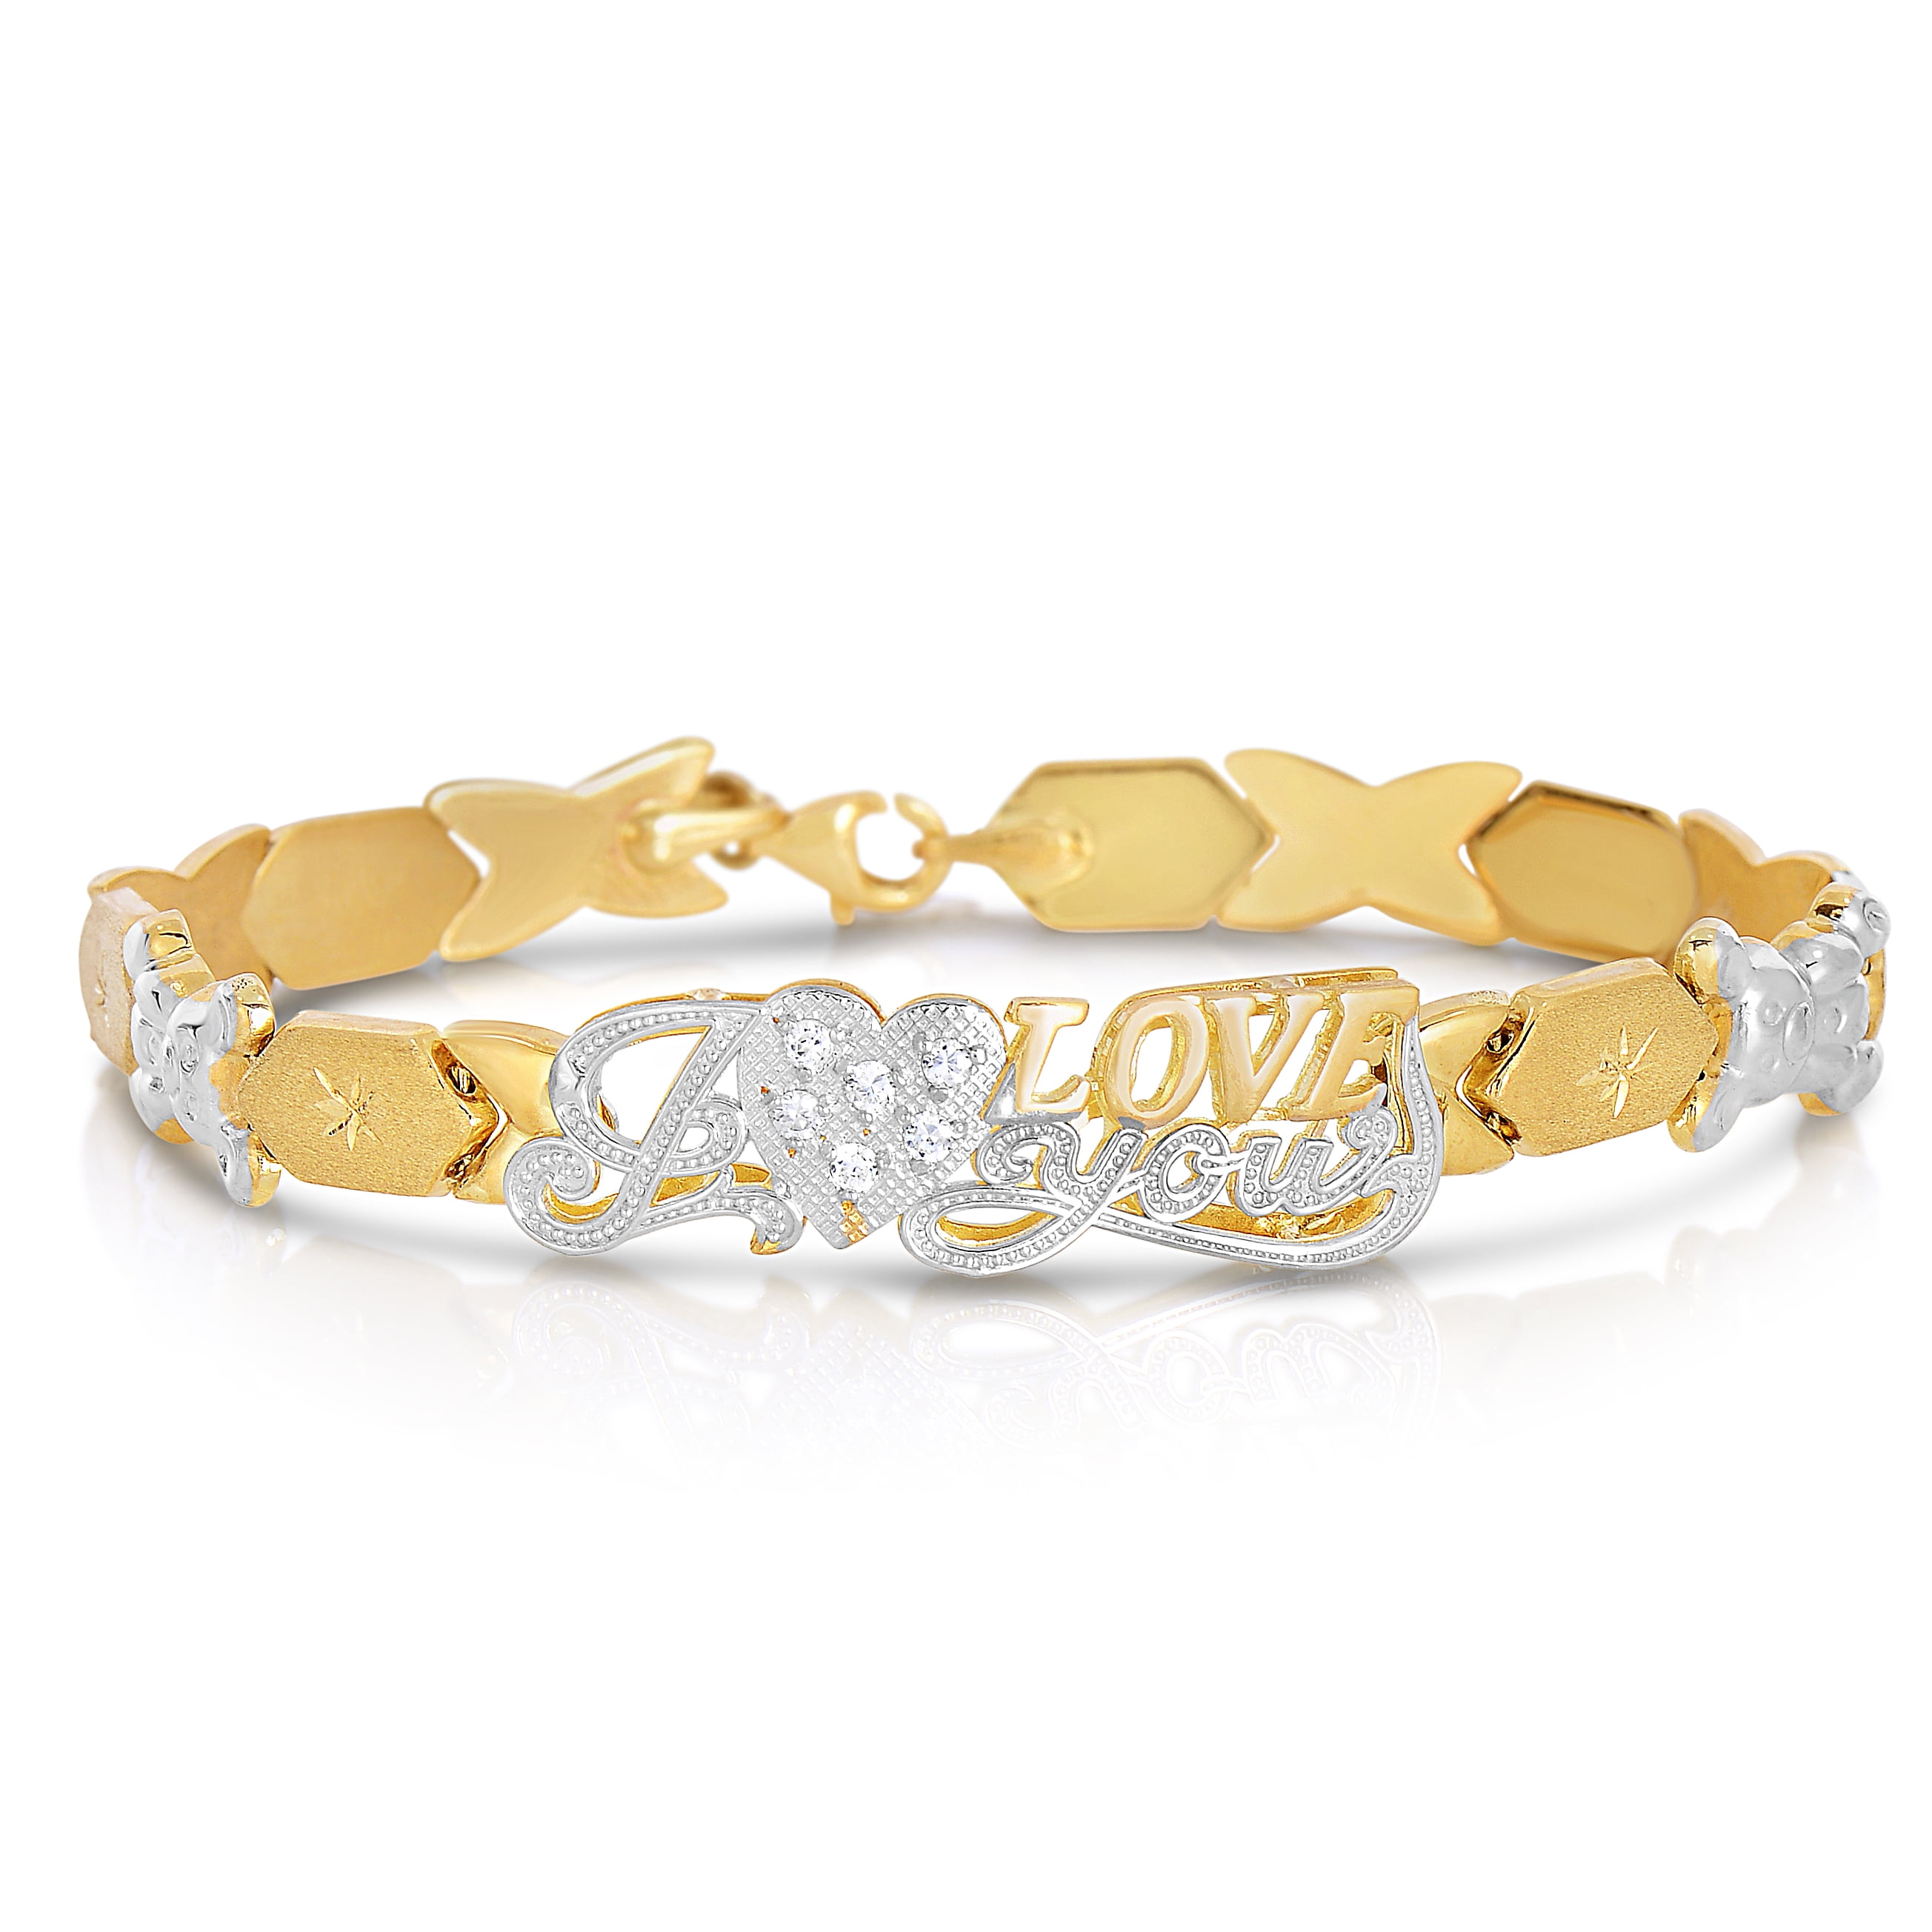 Floreo 10k Two Tone Gold Stampato XOXO Hugs and Kisses with Bear and Heart “I Love You” ID Bracelet 